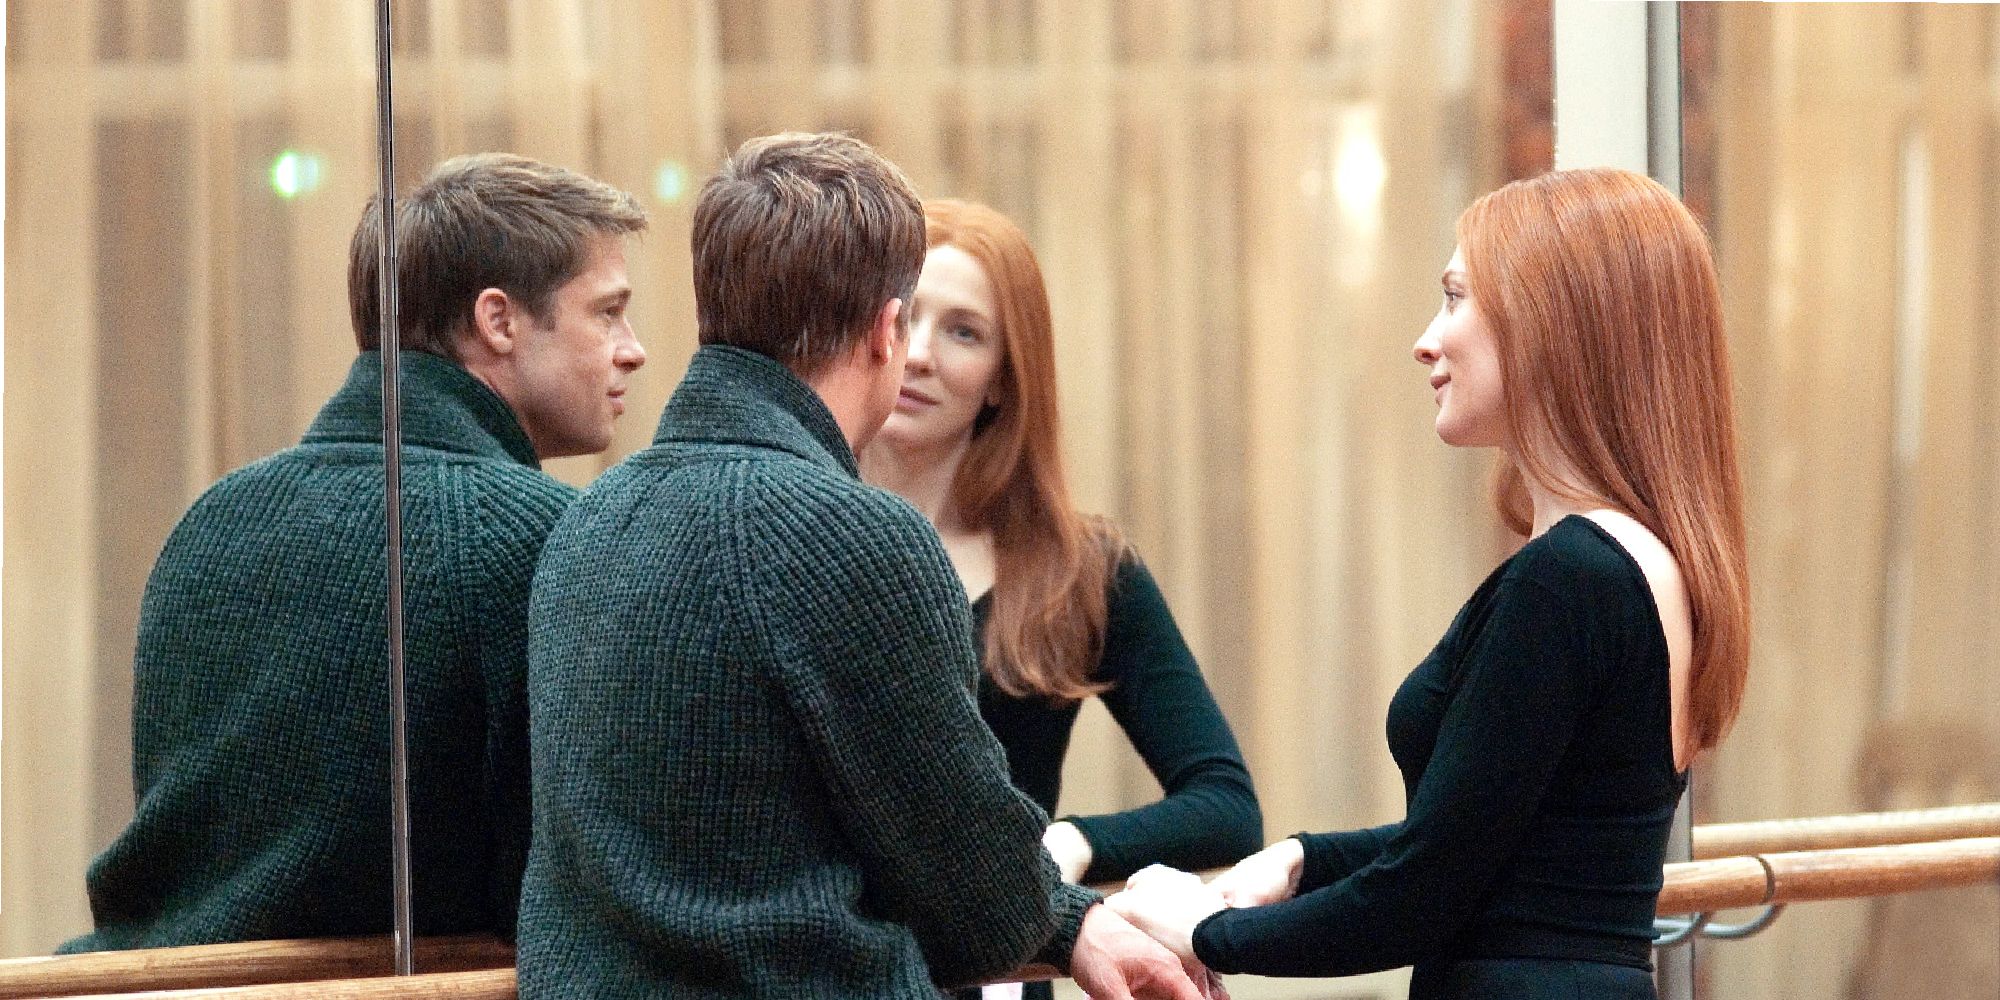 Benjamin and Daisy talking in front of a mirror in The Curious Case of Benjamin Button.